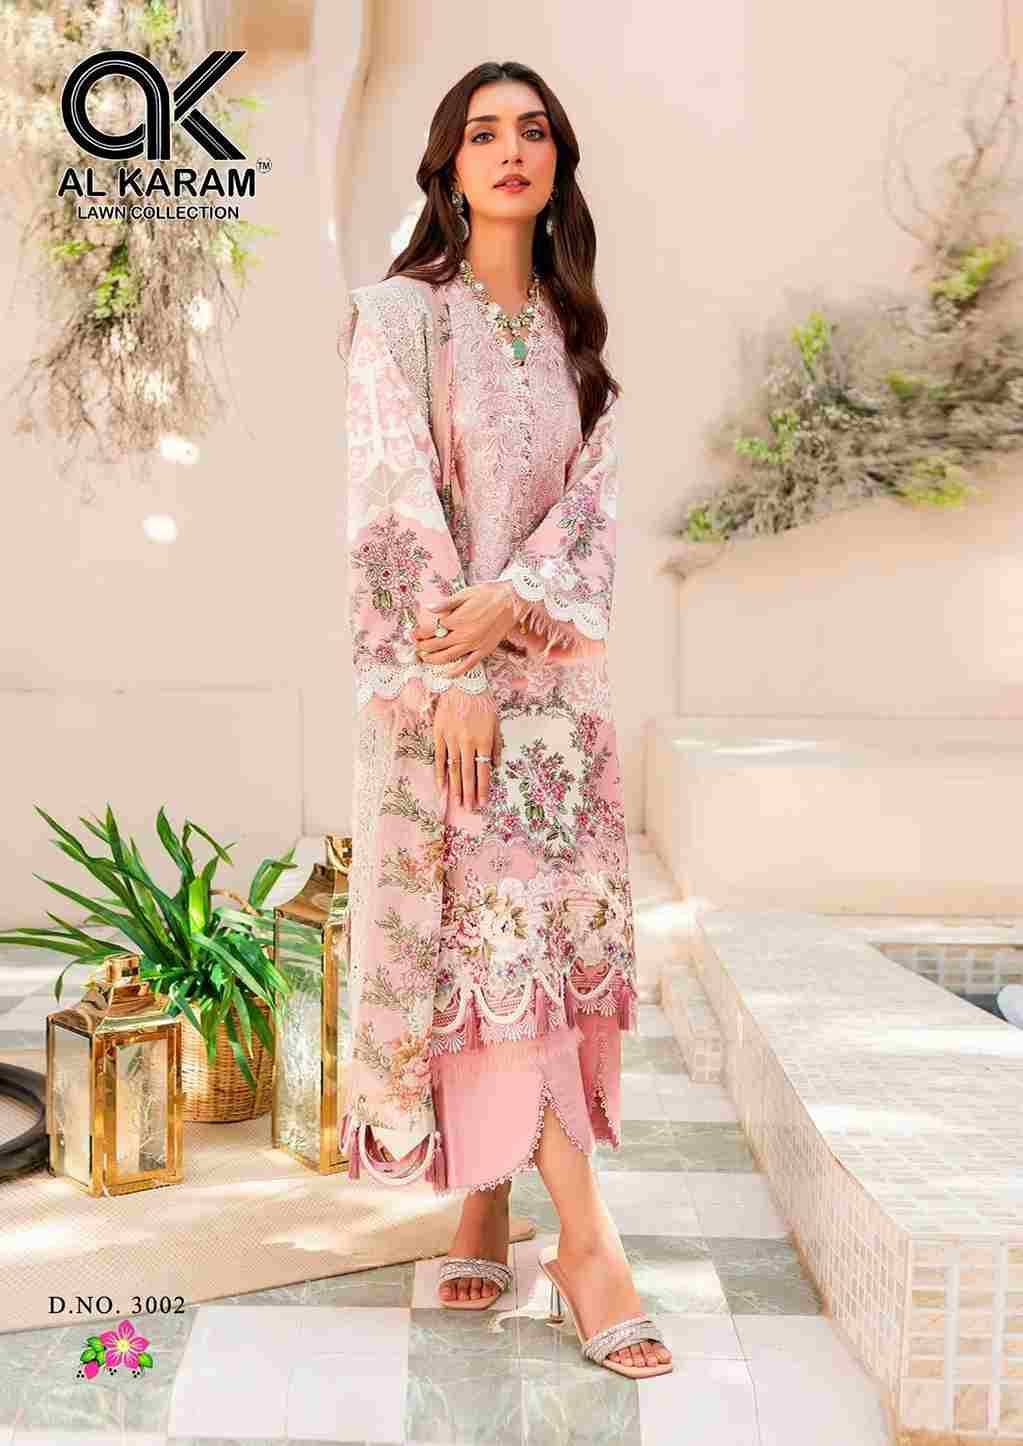 Florence Vol-3 By Al Karam Lawn Collection 3001 To 3006 Series Beautiful Pakistani Suits Stylish Fancy Colorful Casual Wear & Ethnic Wear Pure Cambric Dresses At Wholesale Price